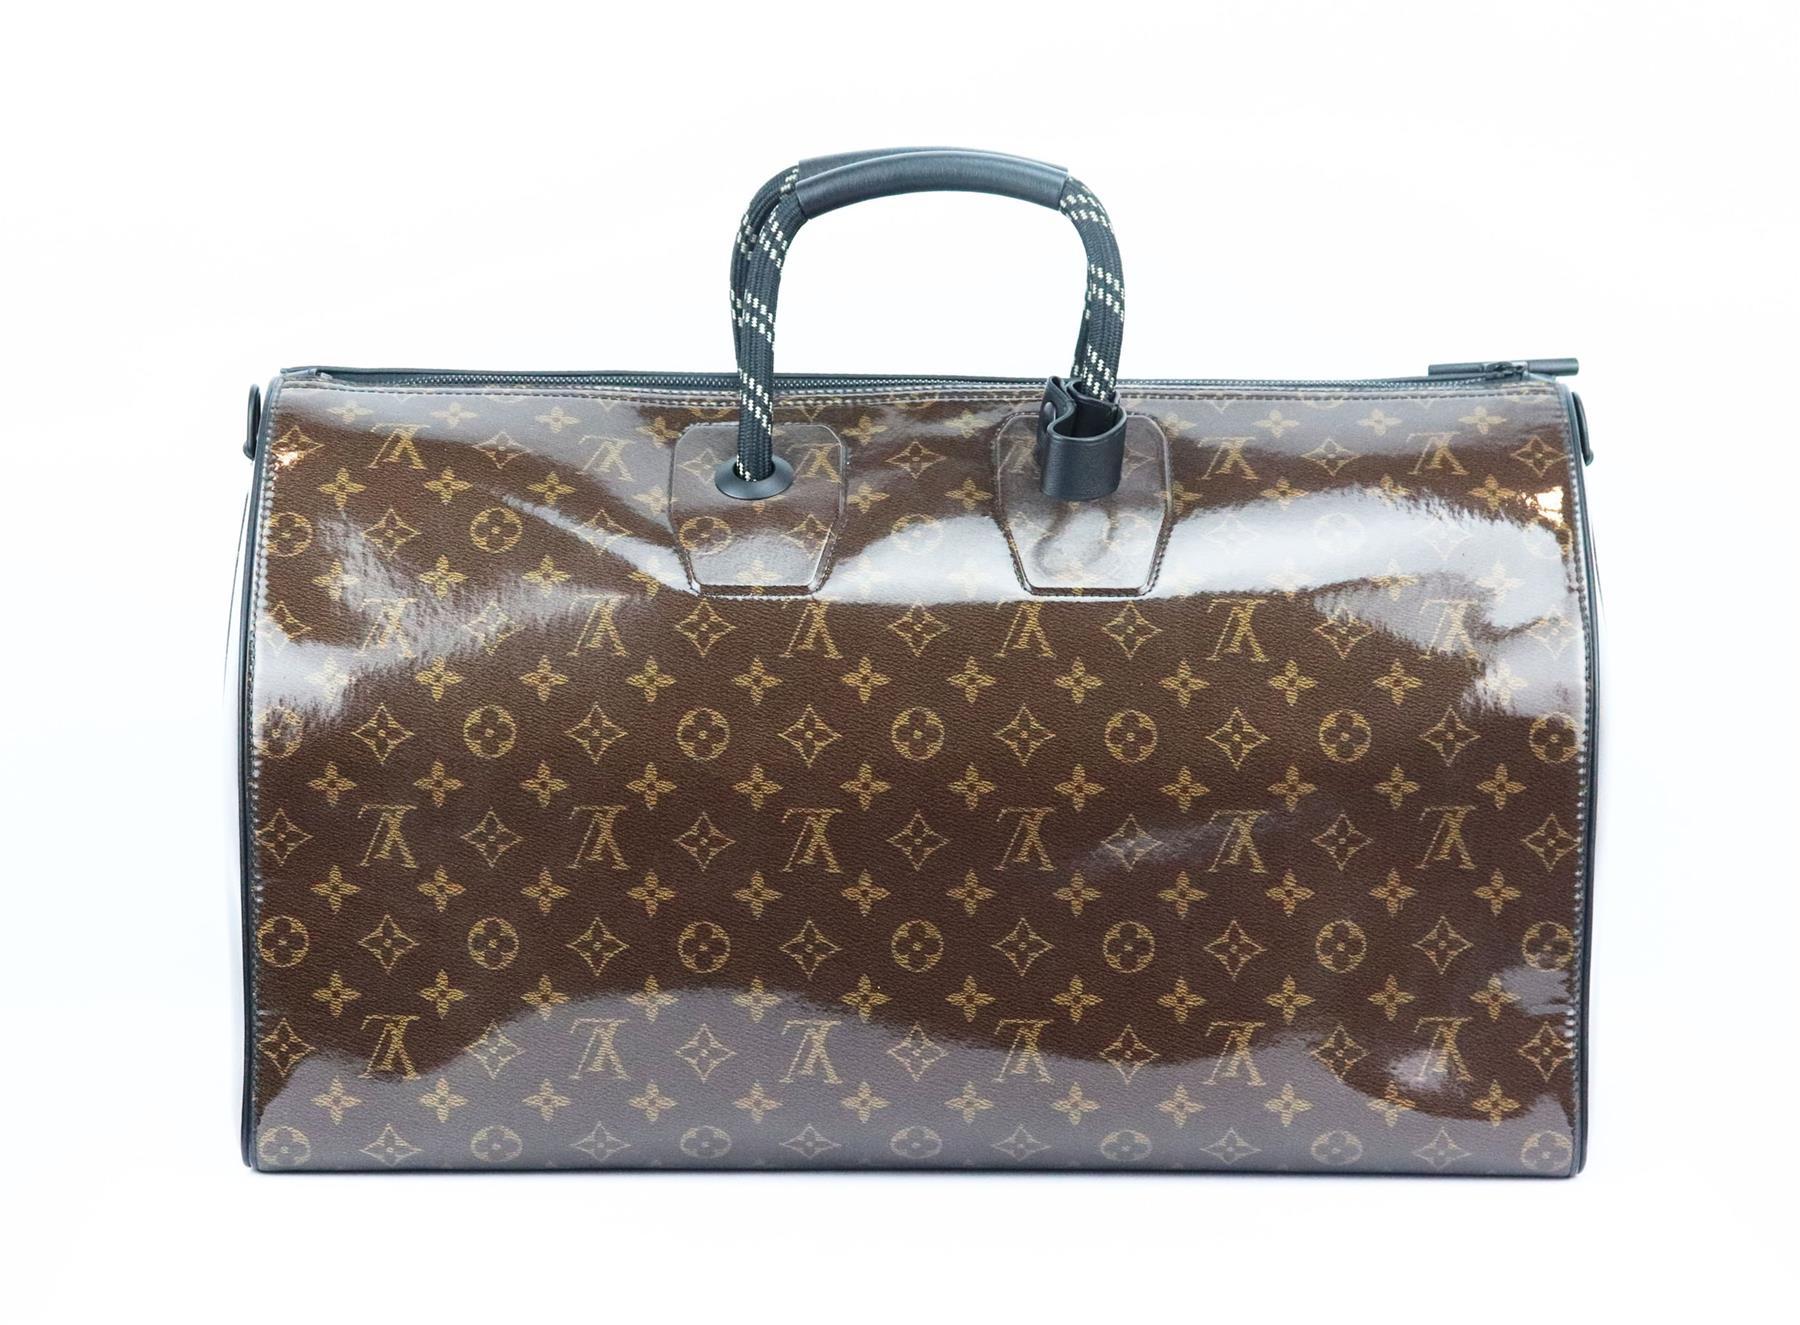 Louis Vuitton Bag With Rope Handle - 3 For Sale on 1stDibs